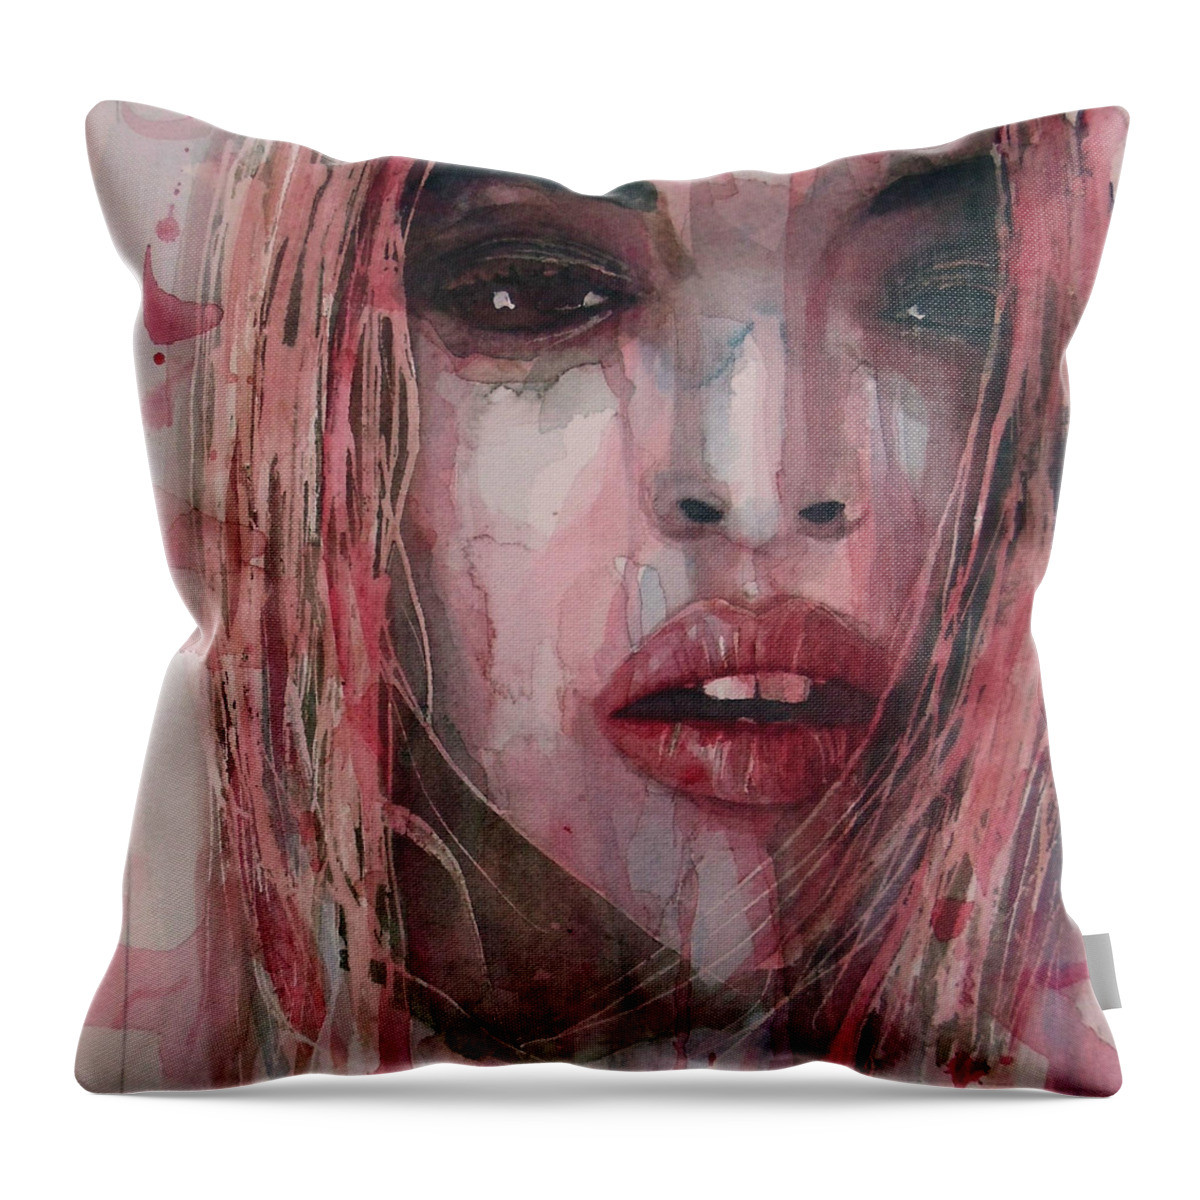 Priscilla Presley Throw Pillow featuring the painting If I Can Dream by Paul Lovering